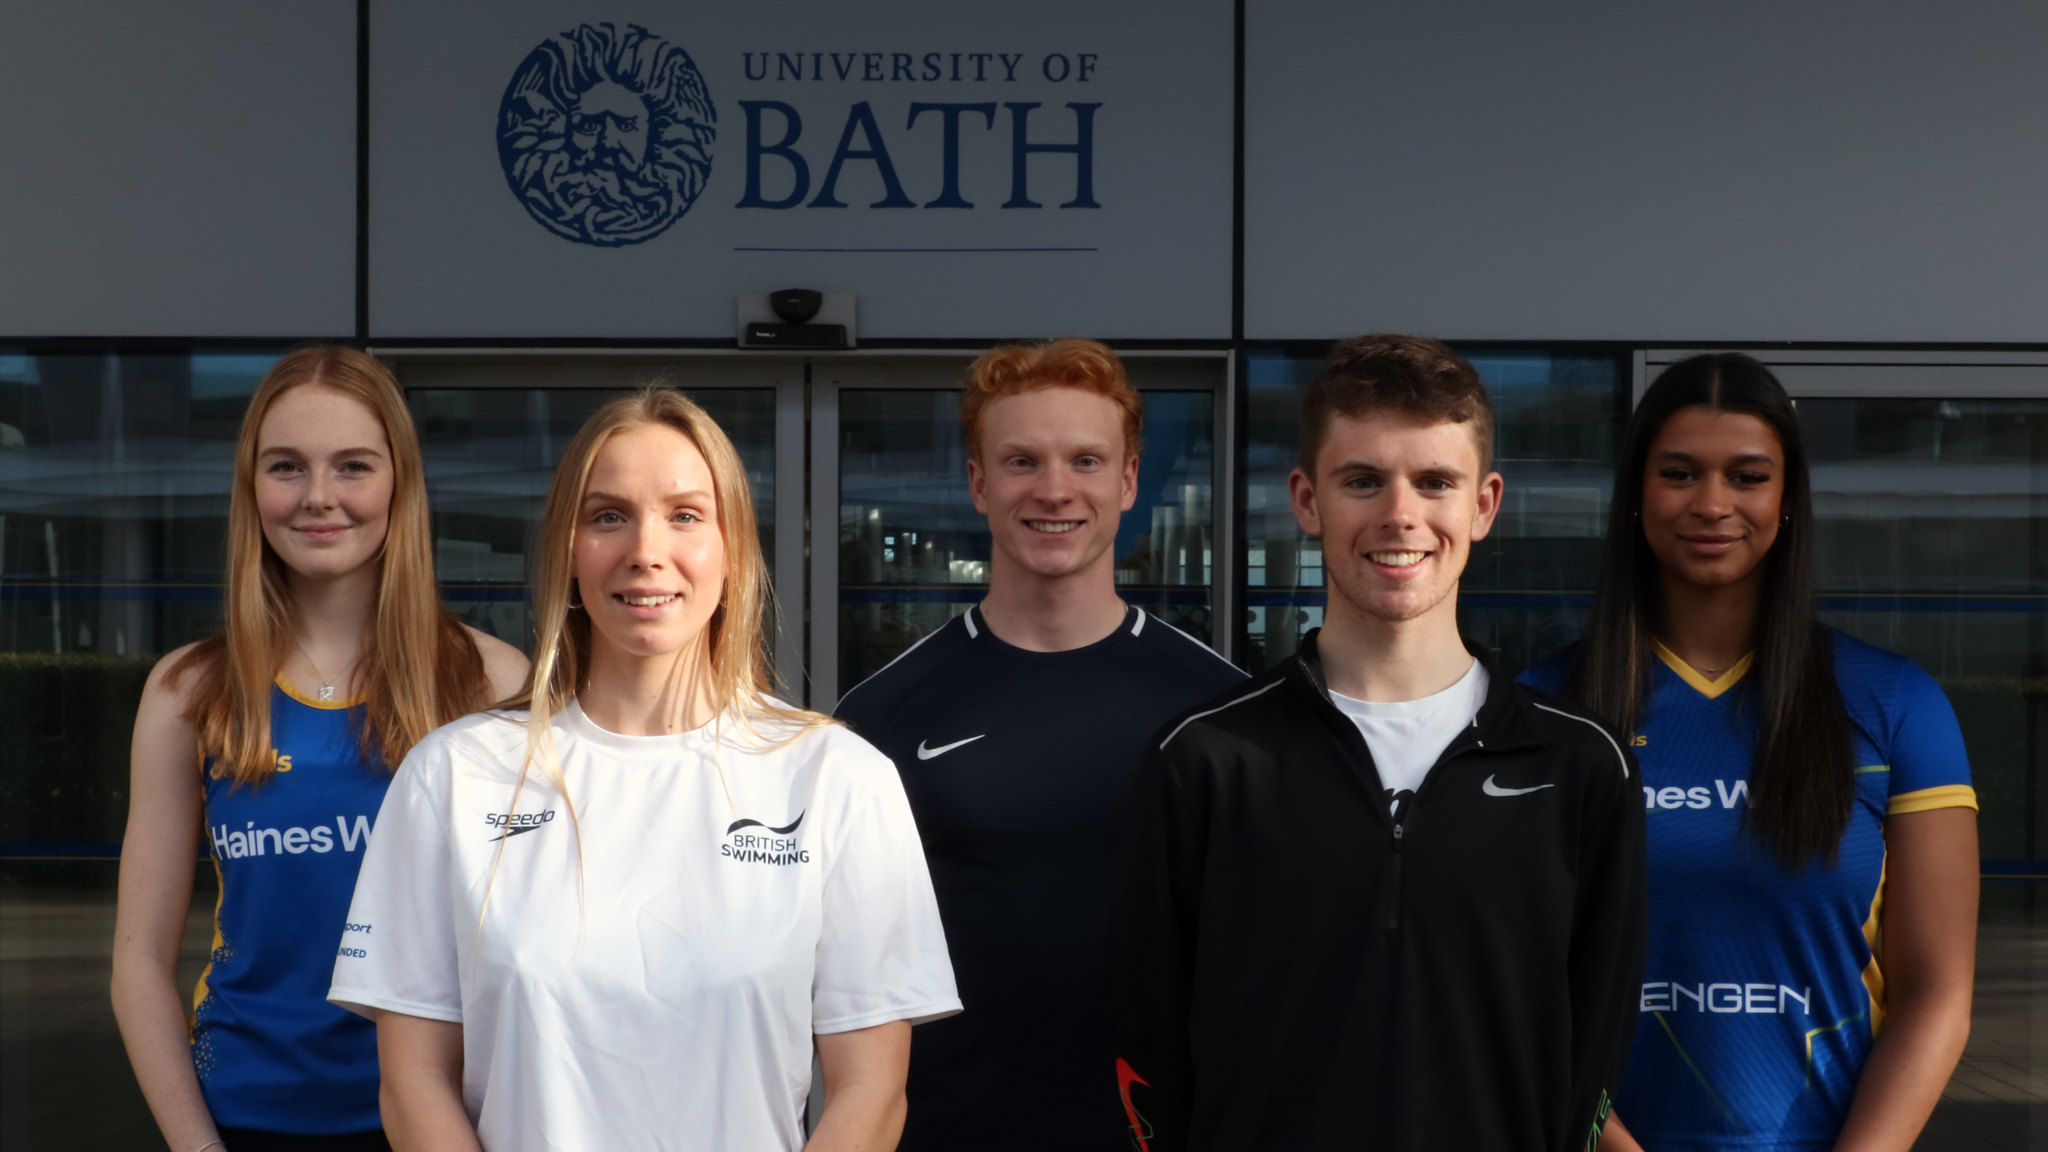 A group of young people wearing University of Bath branded sportswear.